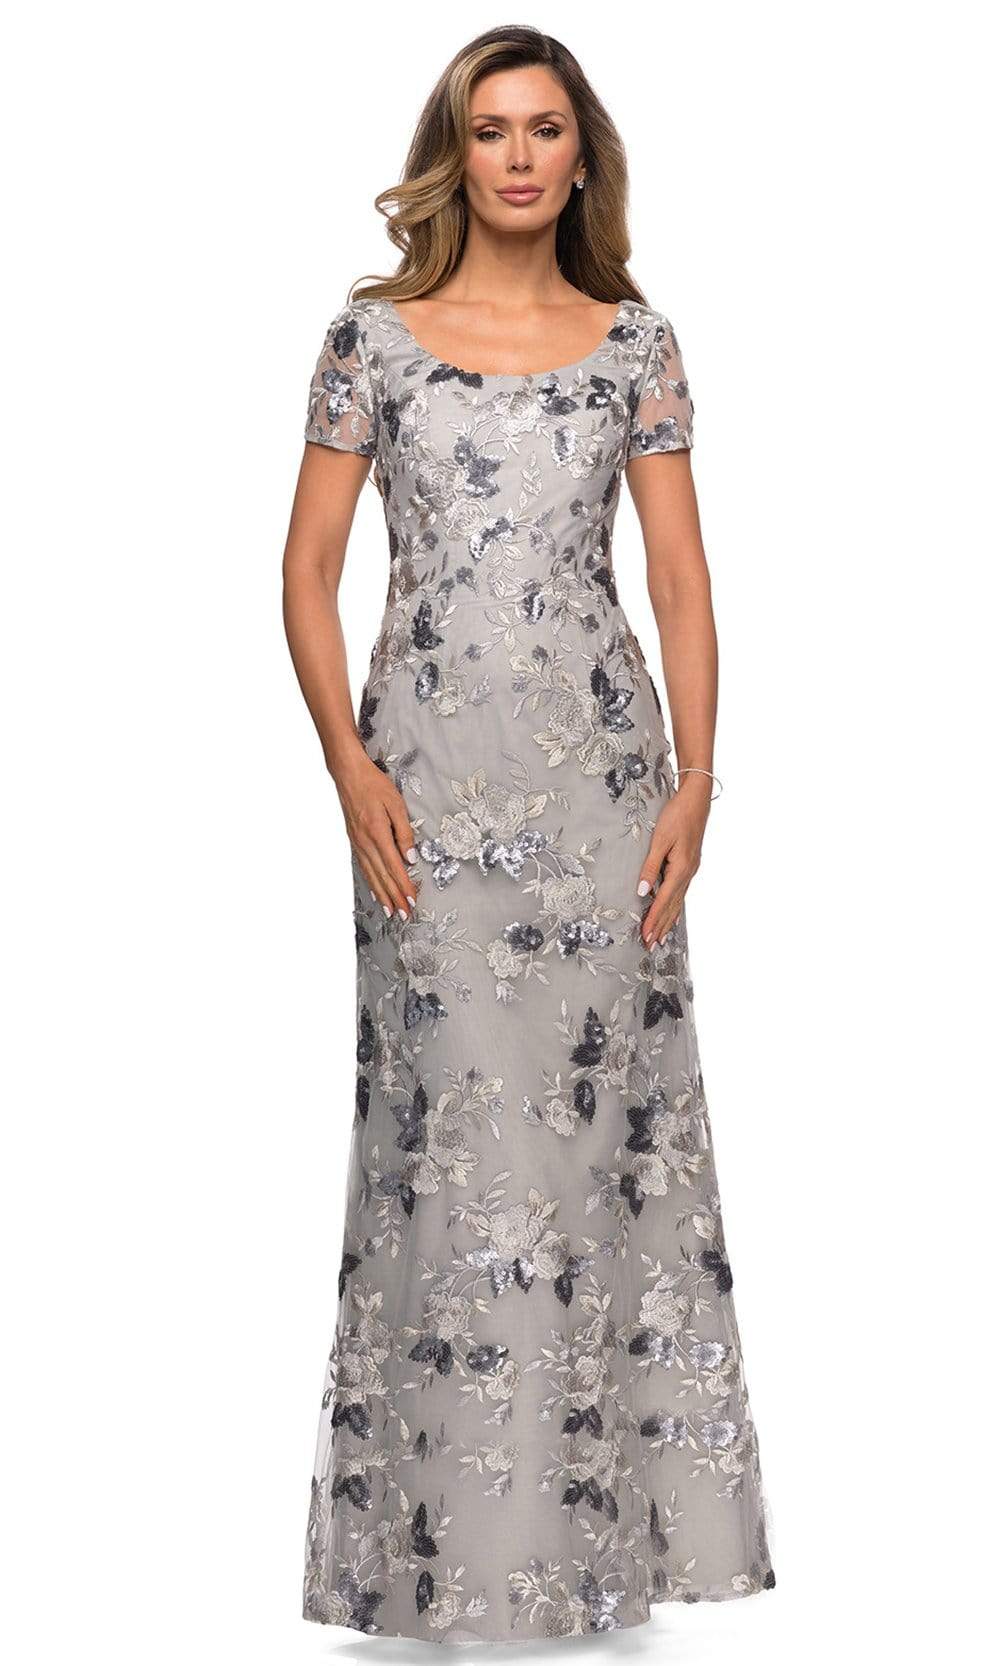 Image of La Femme - 27991 Sequined Floral Lace Mother of the Groom Sheath Dress